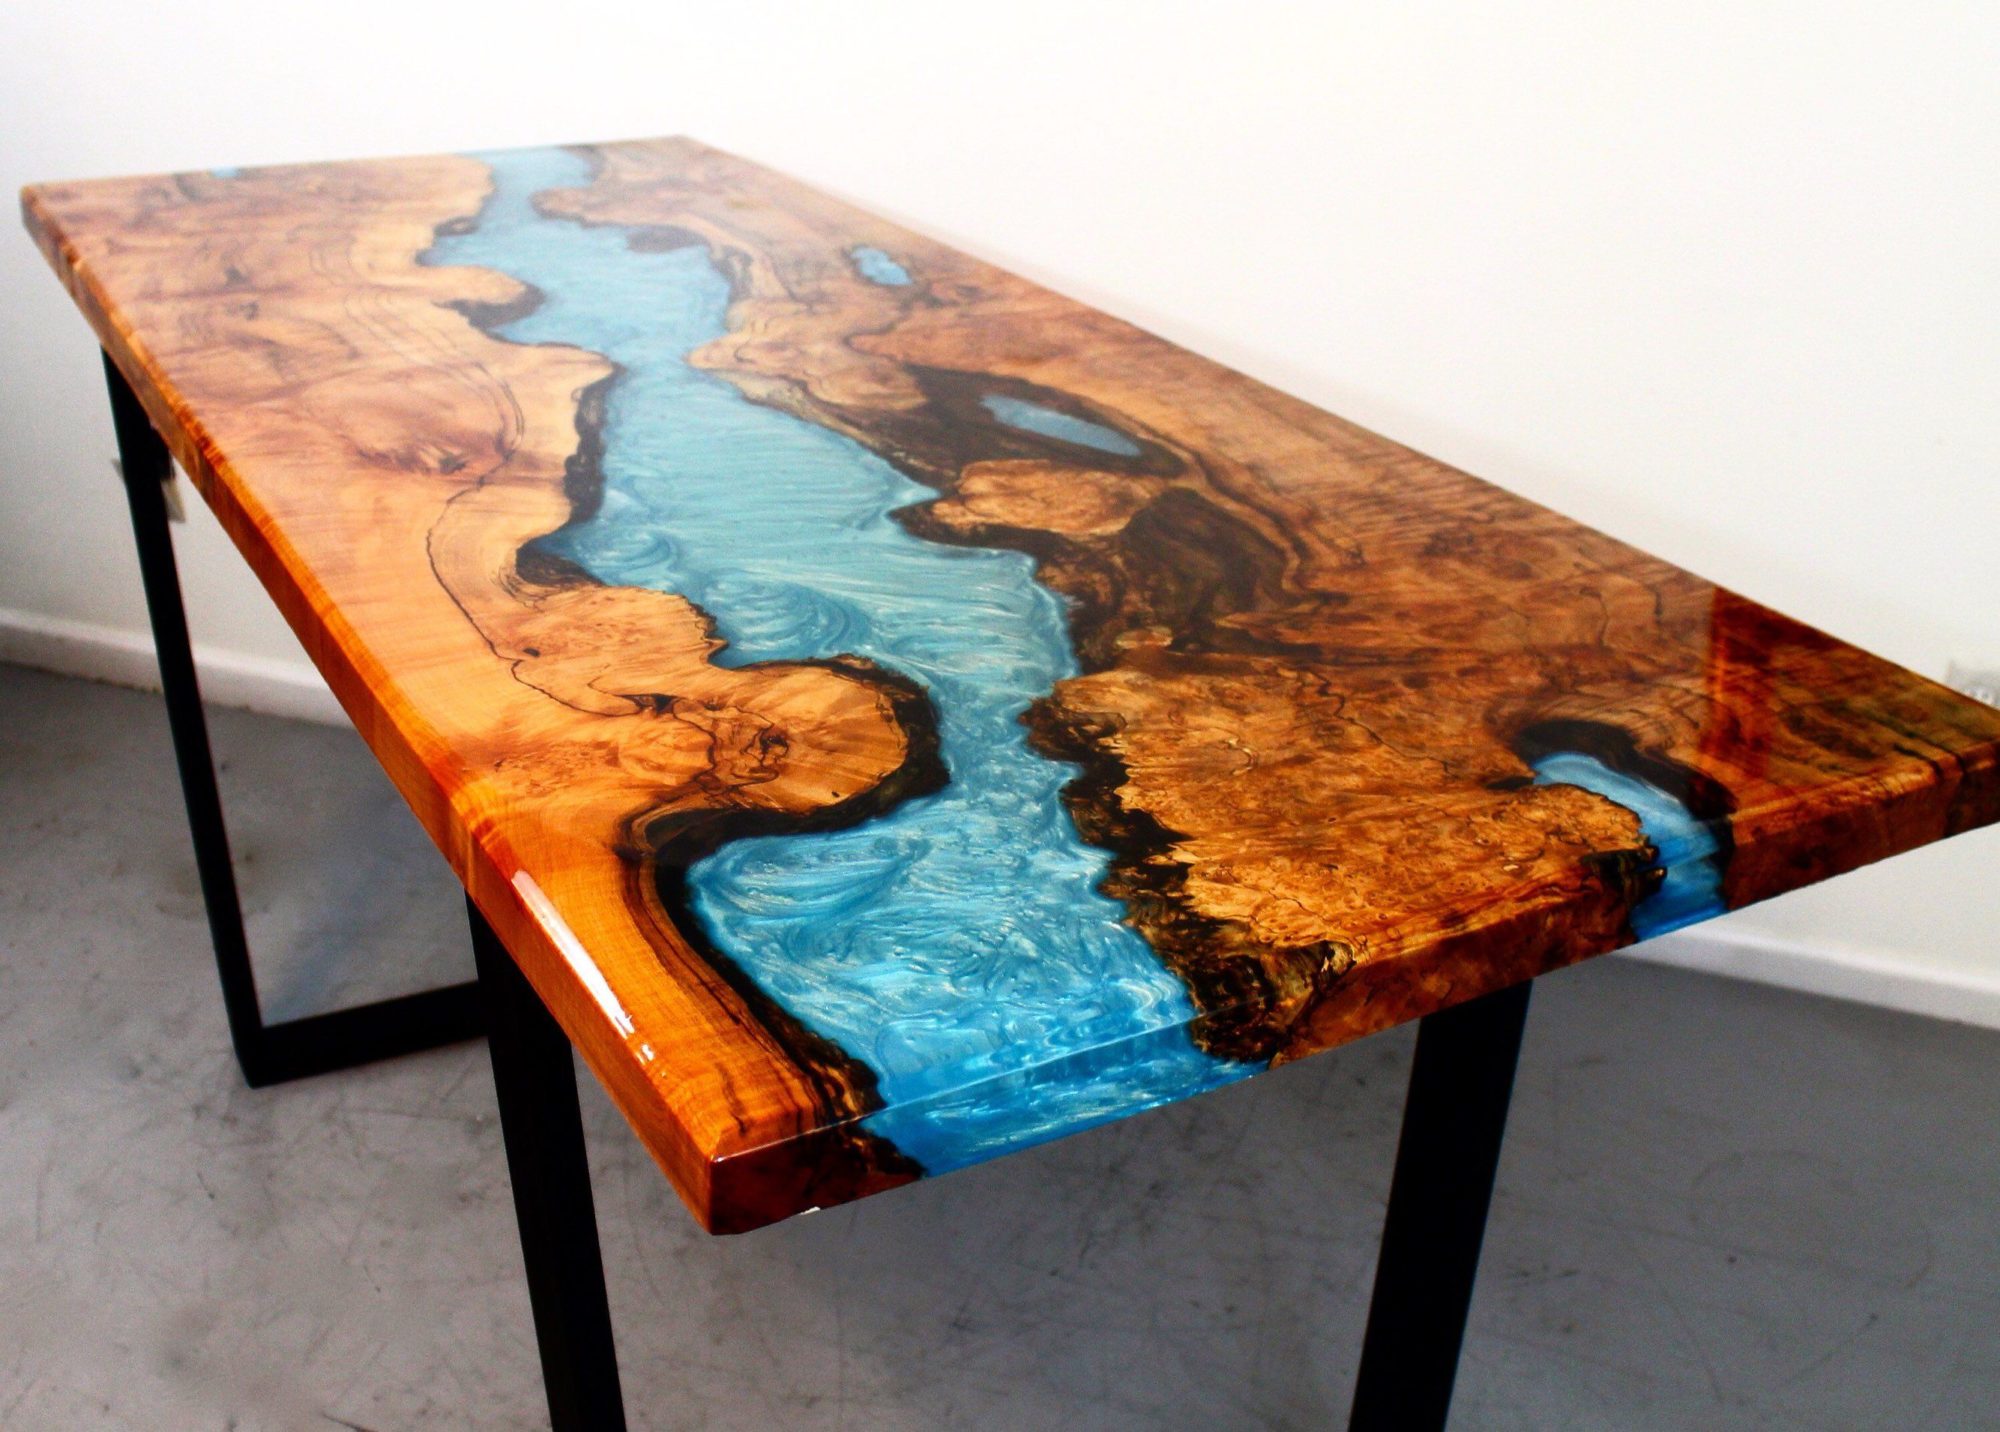 Final Project Report 1: Wood Resin Table - Aesthetics of ...